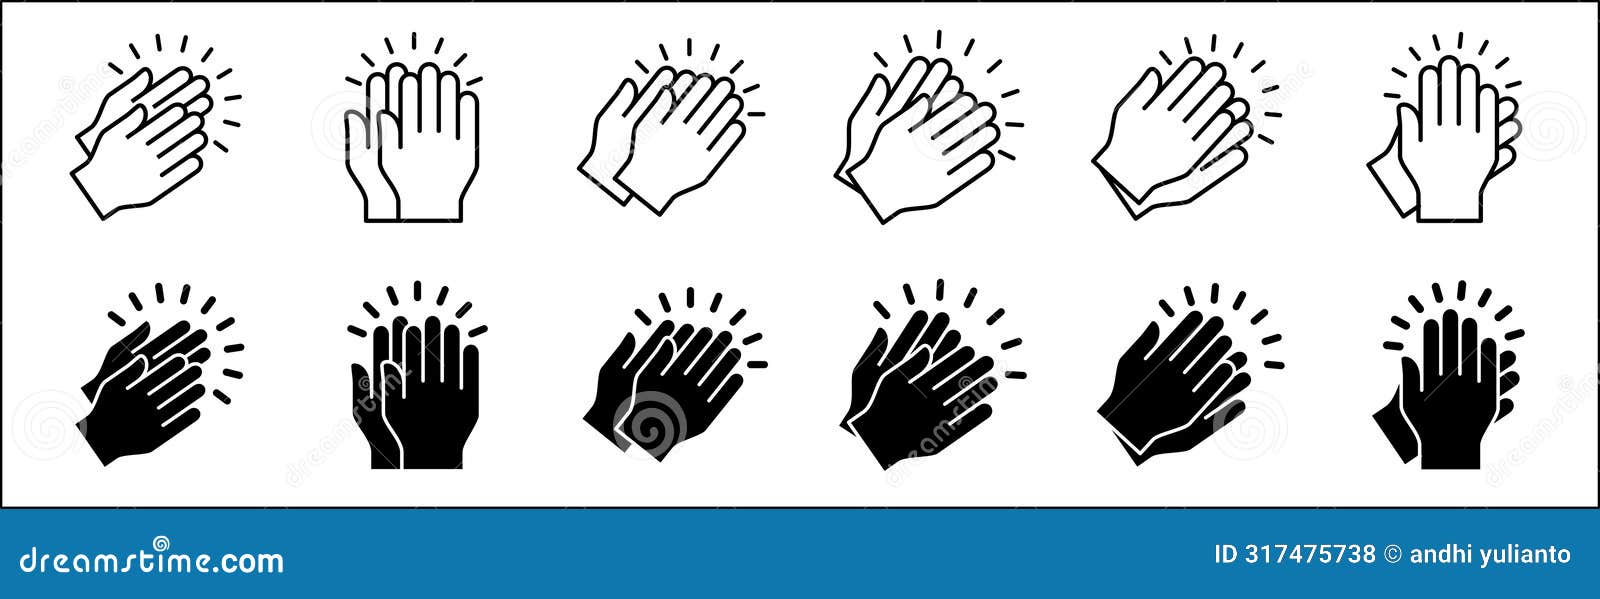 applause . hand clapping icon. hand claps icon set  of acclamation, compliment, appreciation, ovation, bravo,